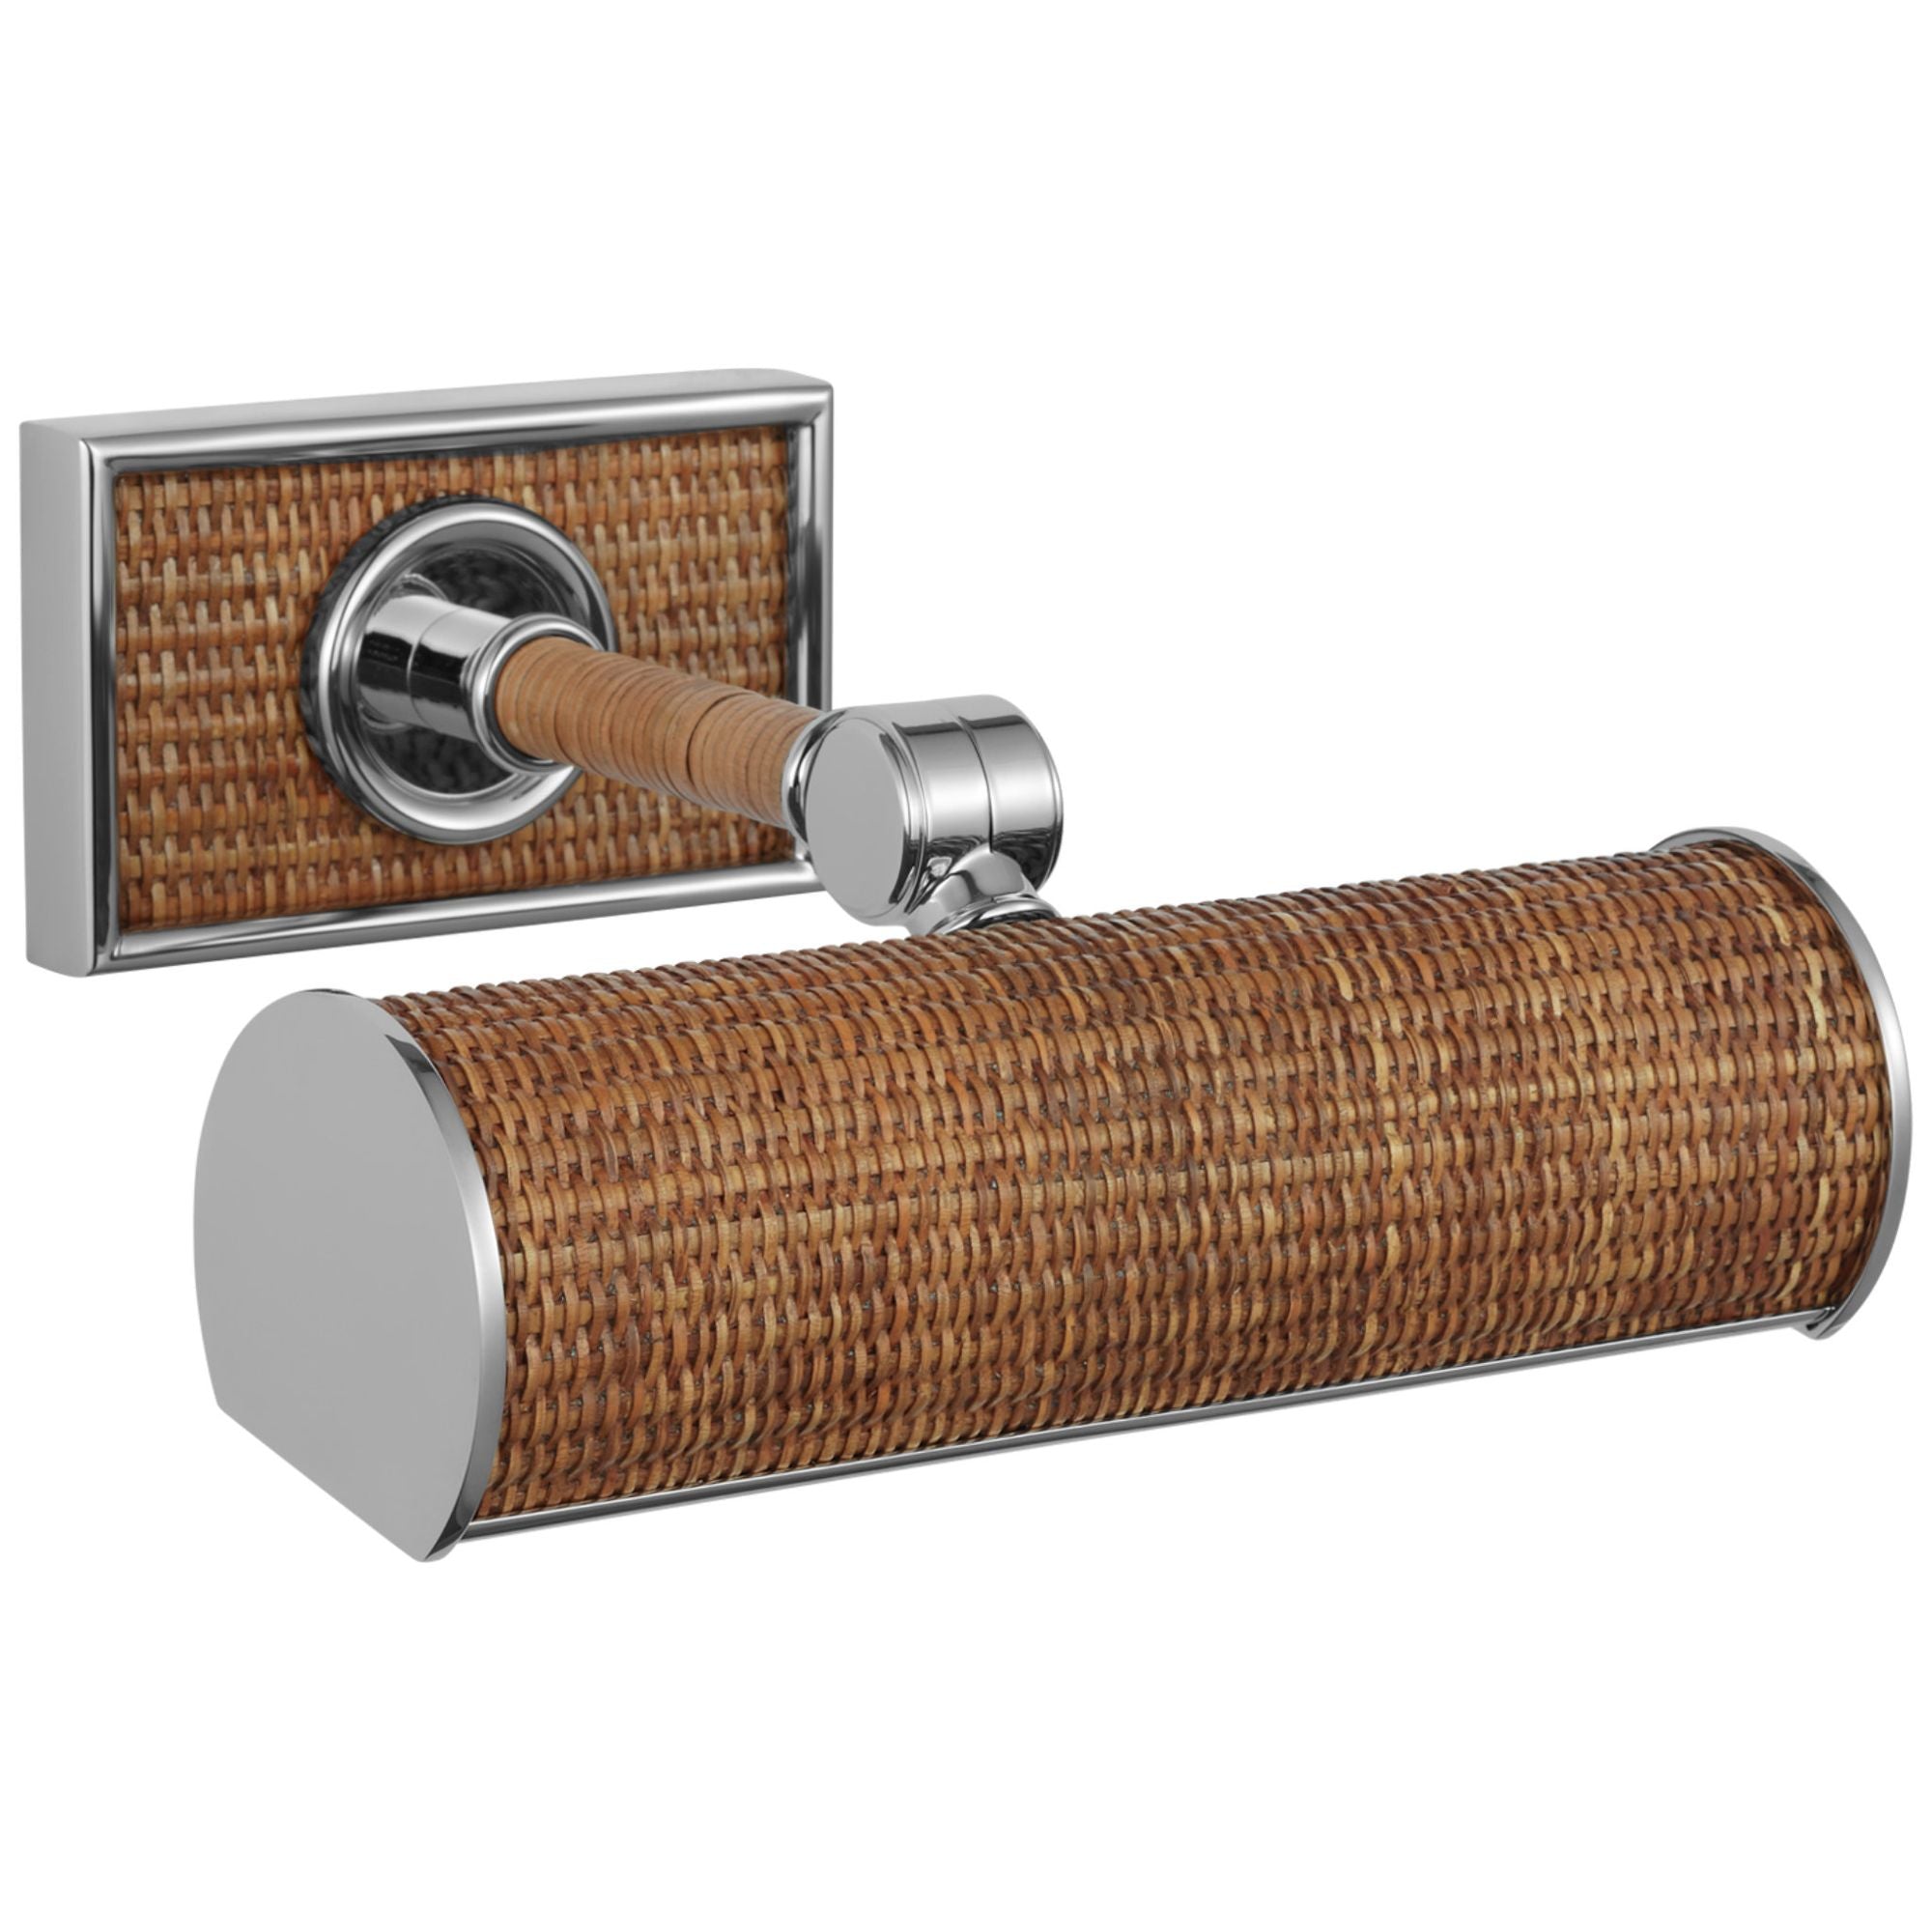 Chapman & Myers Halwell 8" Picture Light in Polished Nickel and Natural Woven Rattan